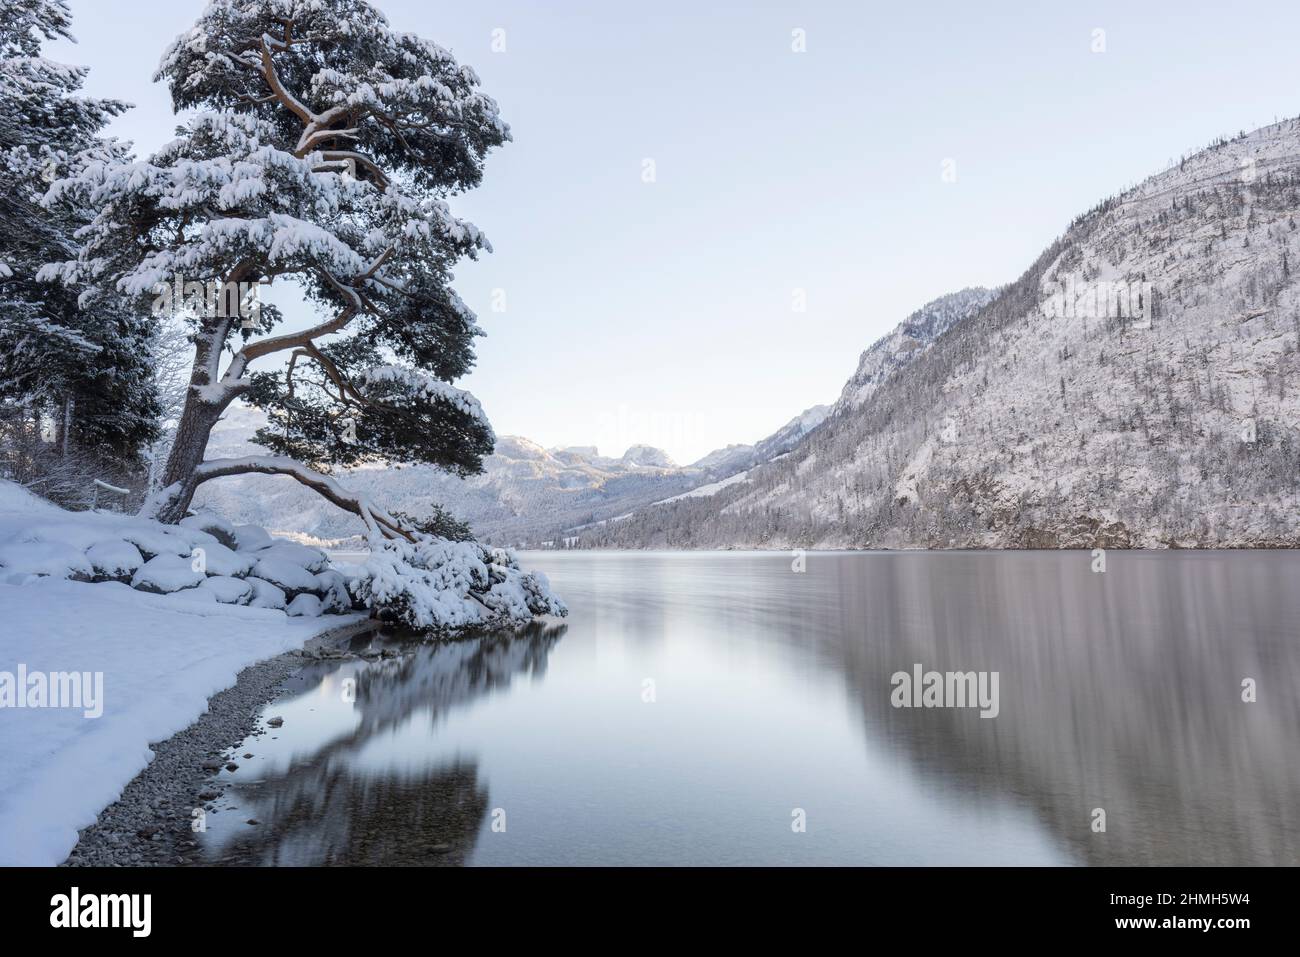 An old pine tree on the Grundlsee. Stock Photo